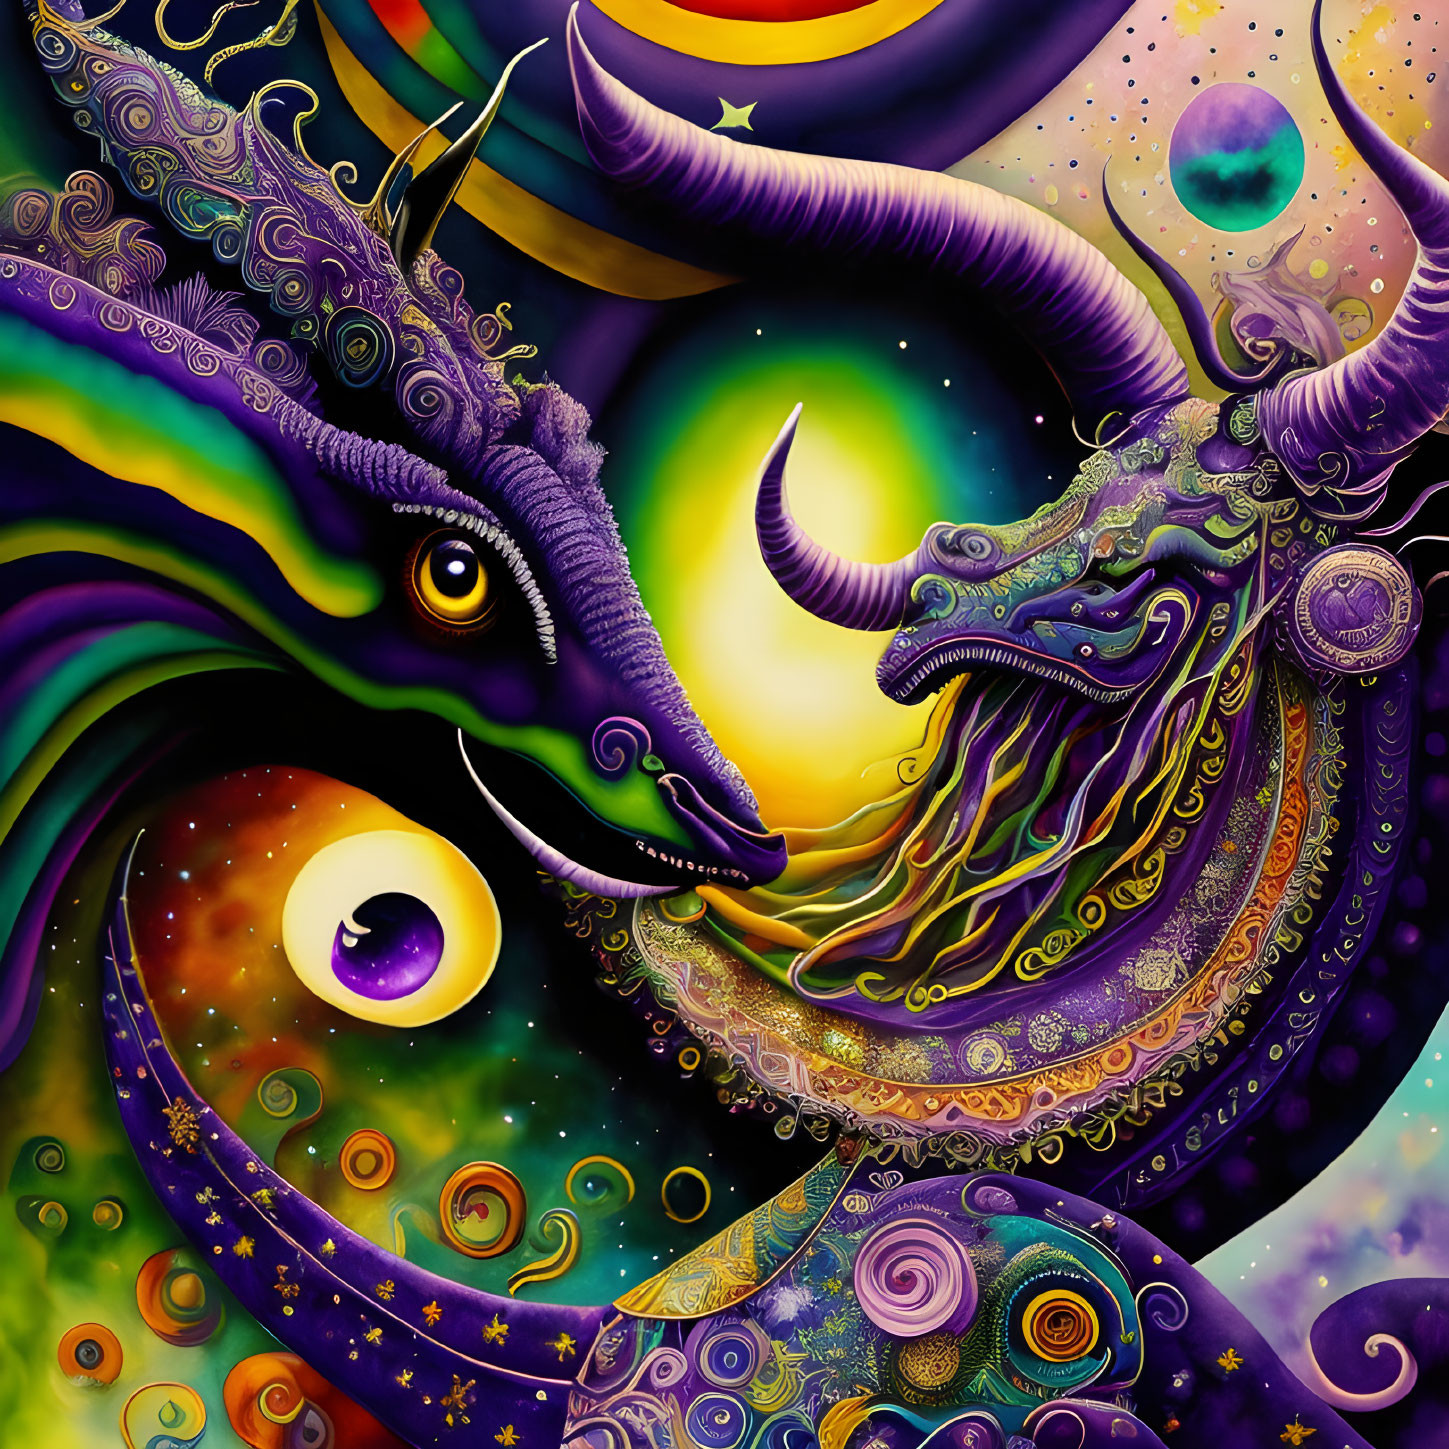 Colorful Cosmic Dragon Artwork with Stars and Planets